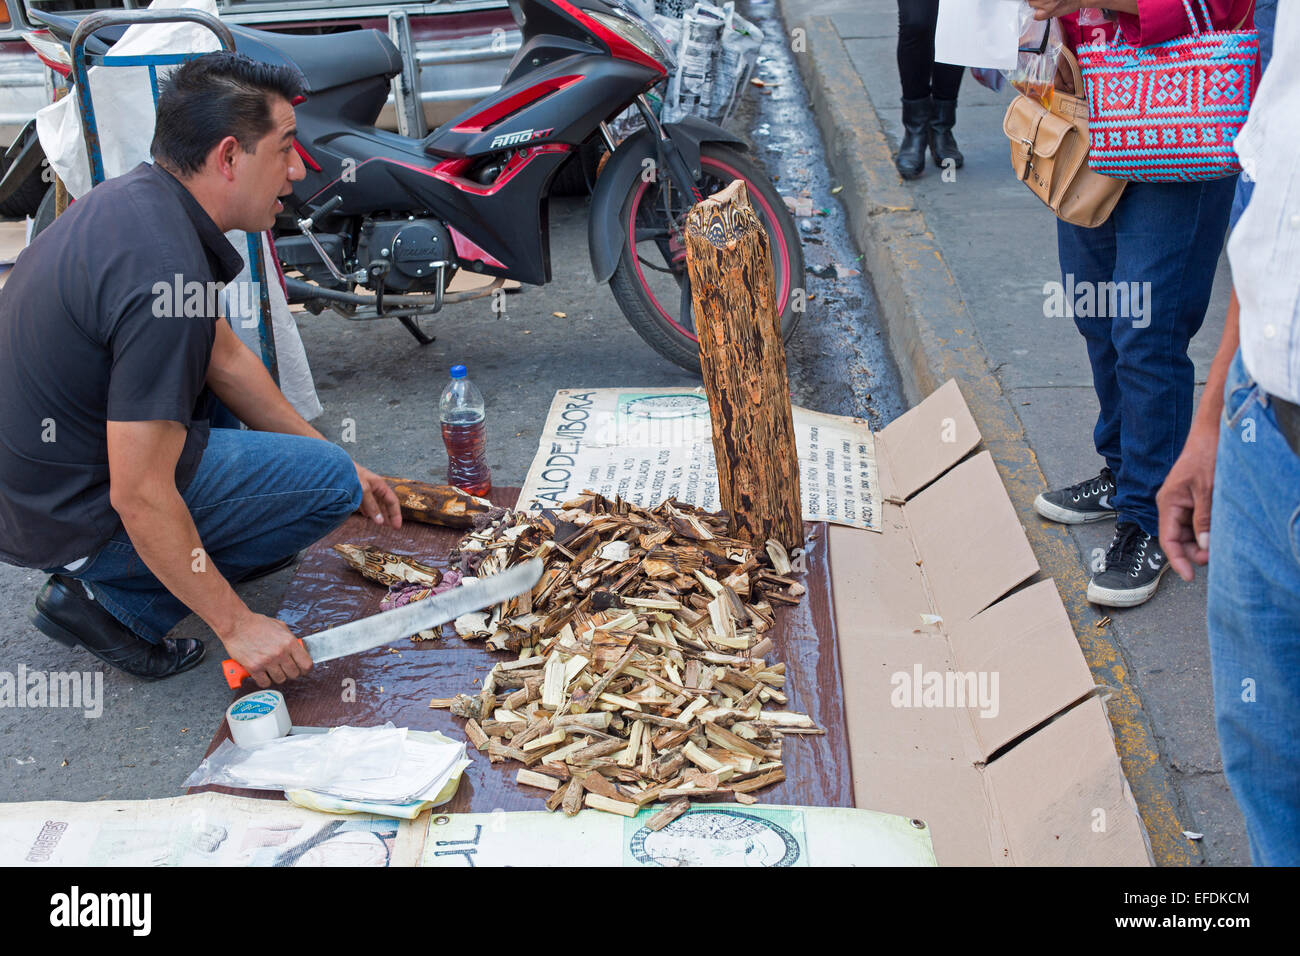 Oaxaca, Mexico - A man sells Palo de víbora (Cyathea divergens) on the street. It is thought to be a medicinal plant. Stock Photo